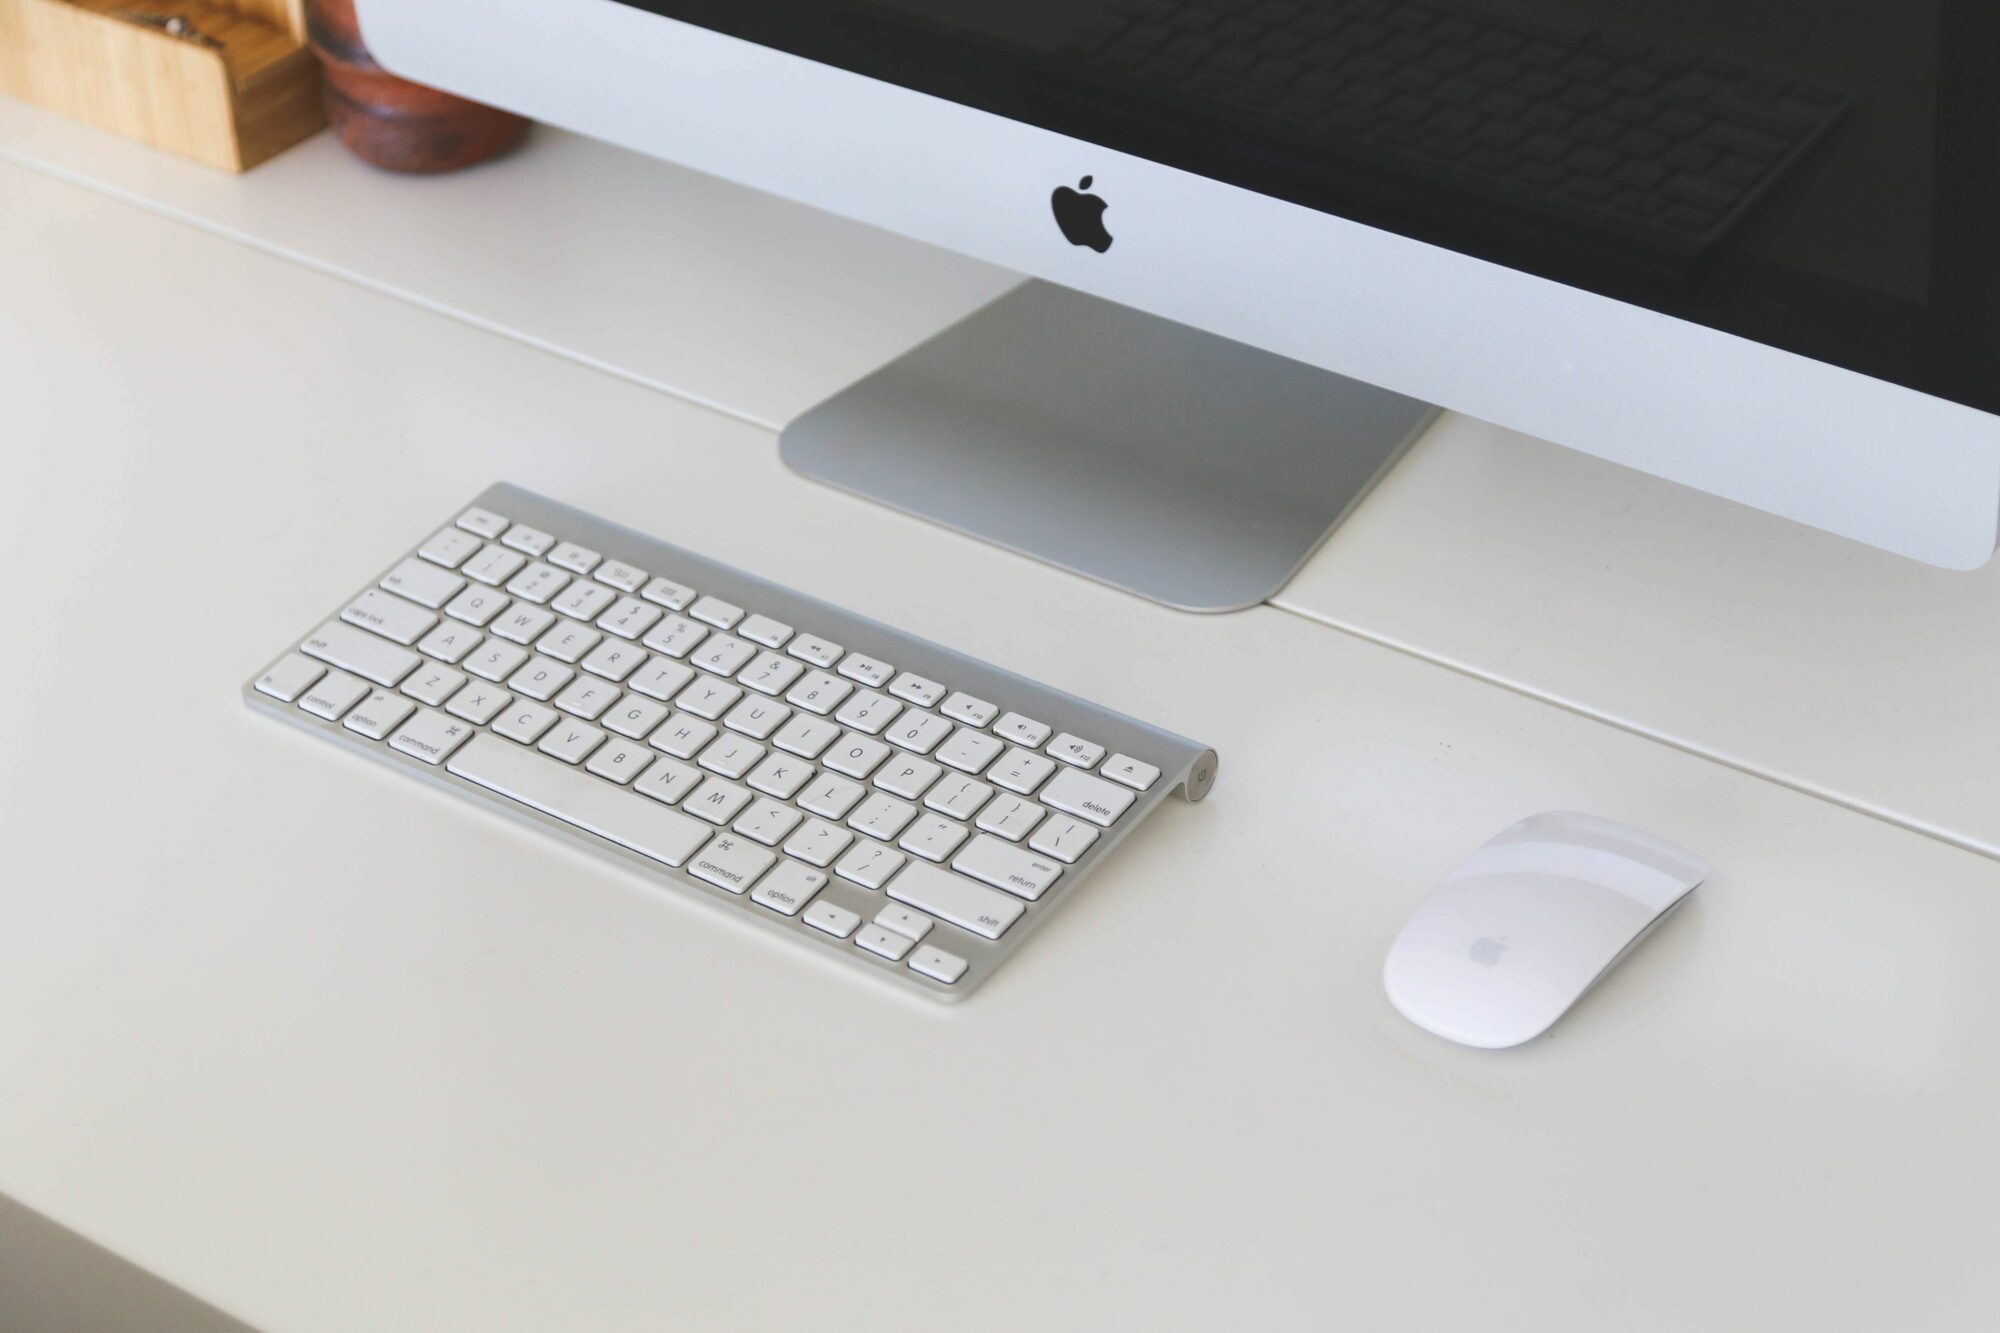 Keyboard, Mouse, and Computer Monitor Free Stock Picture